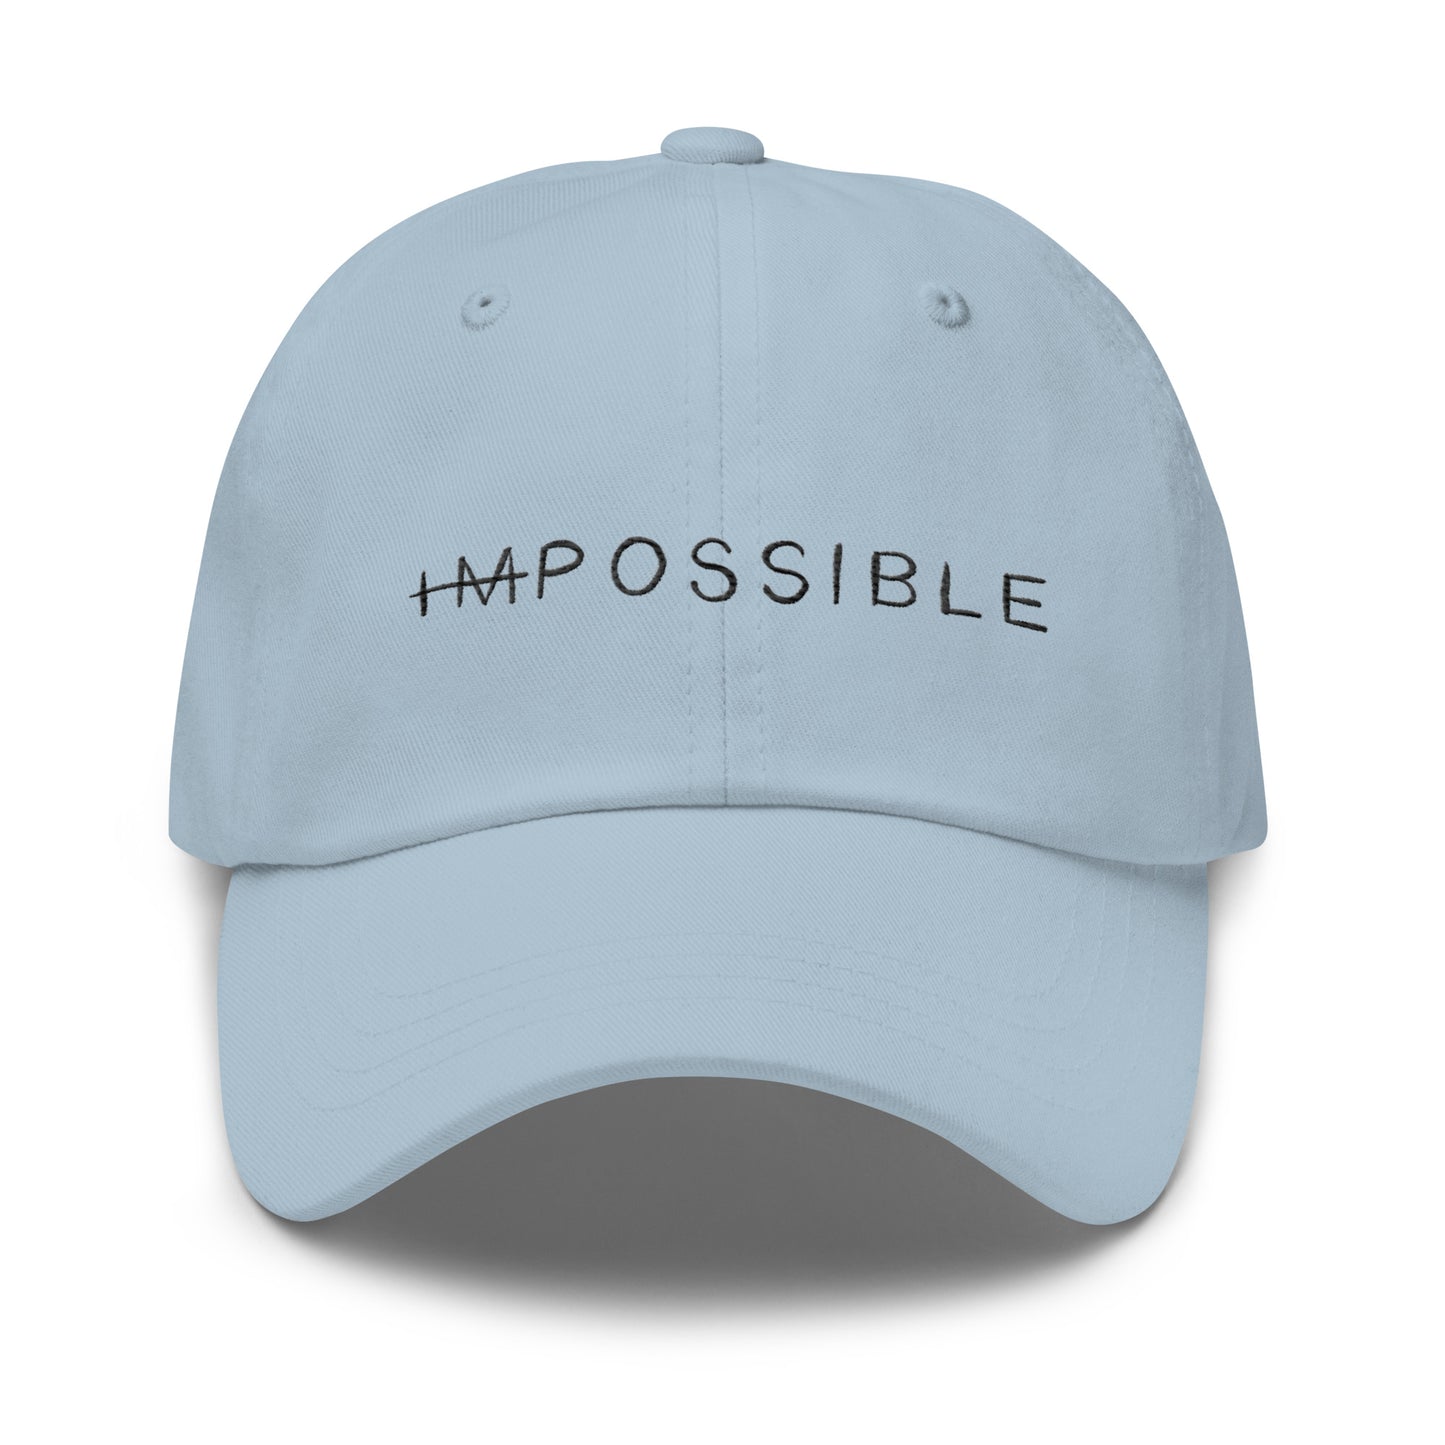 “IM- POSSIBLE”  hat